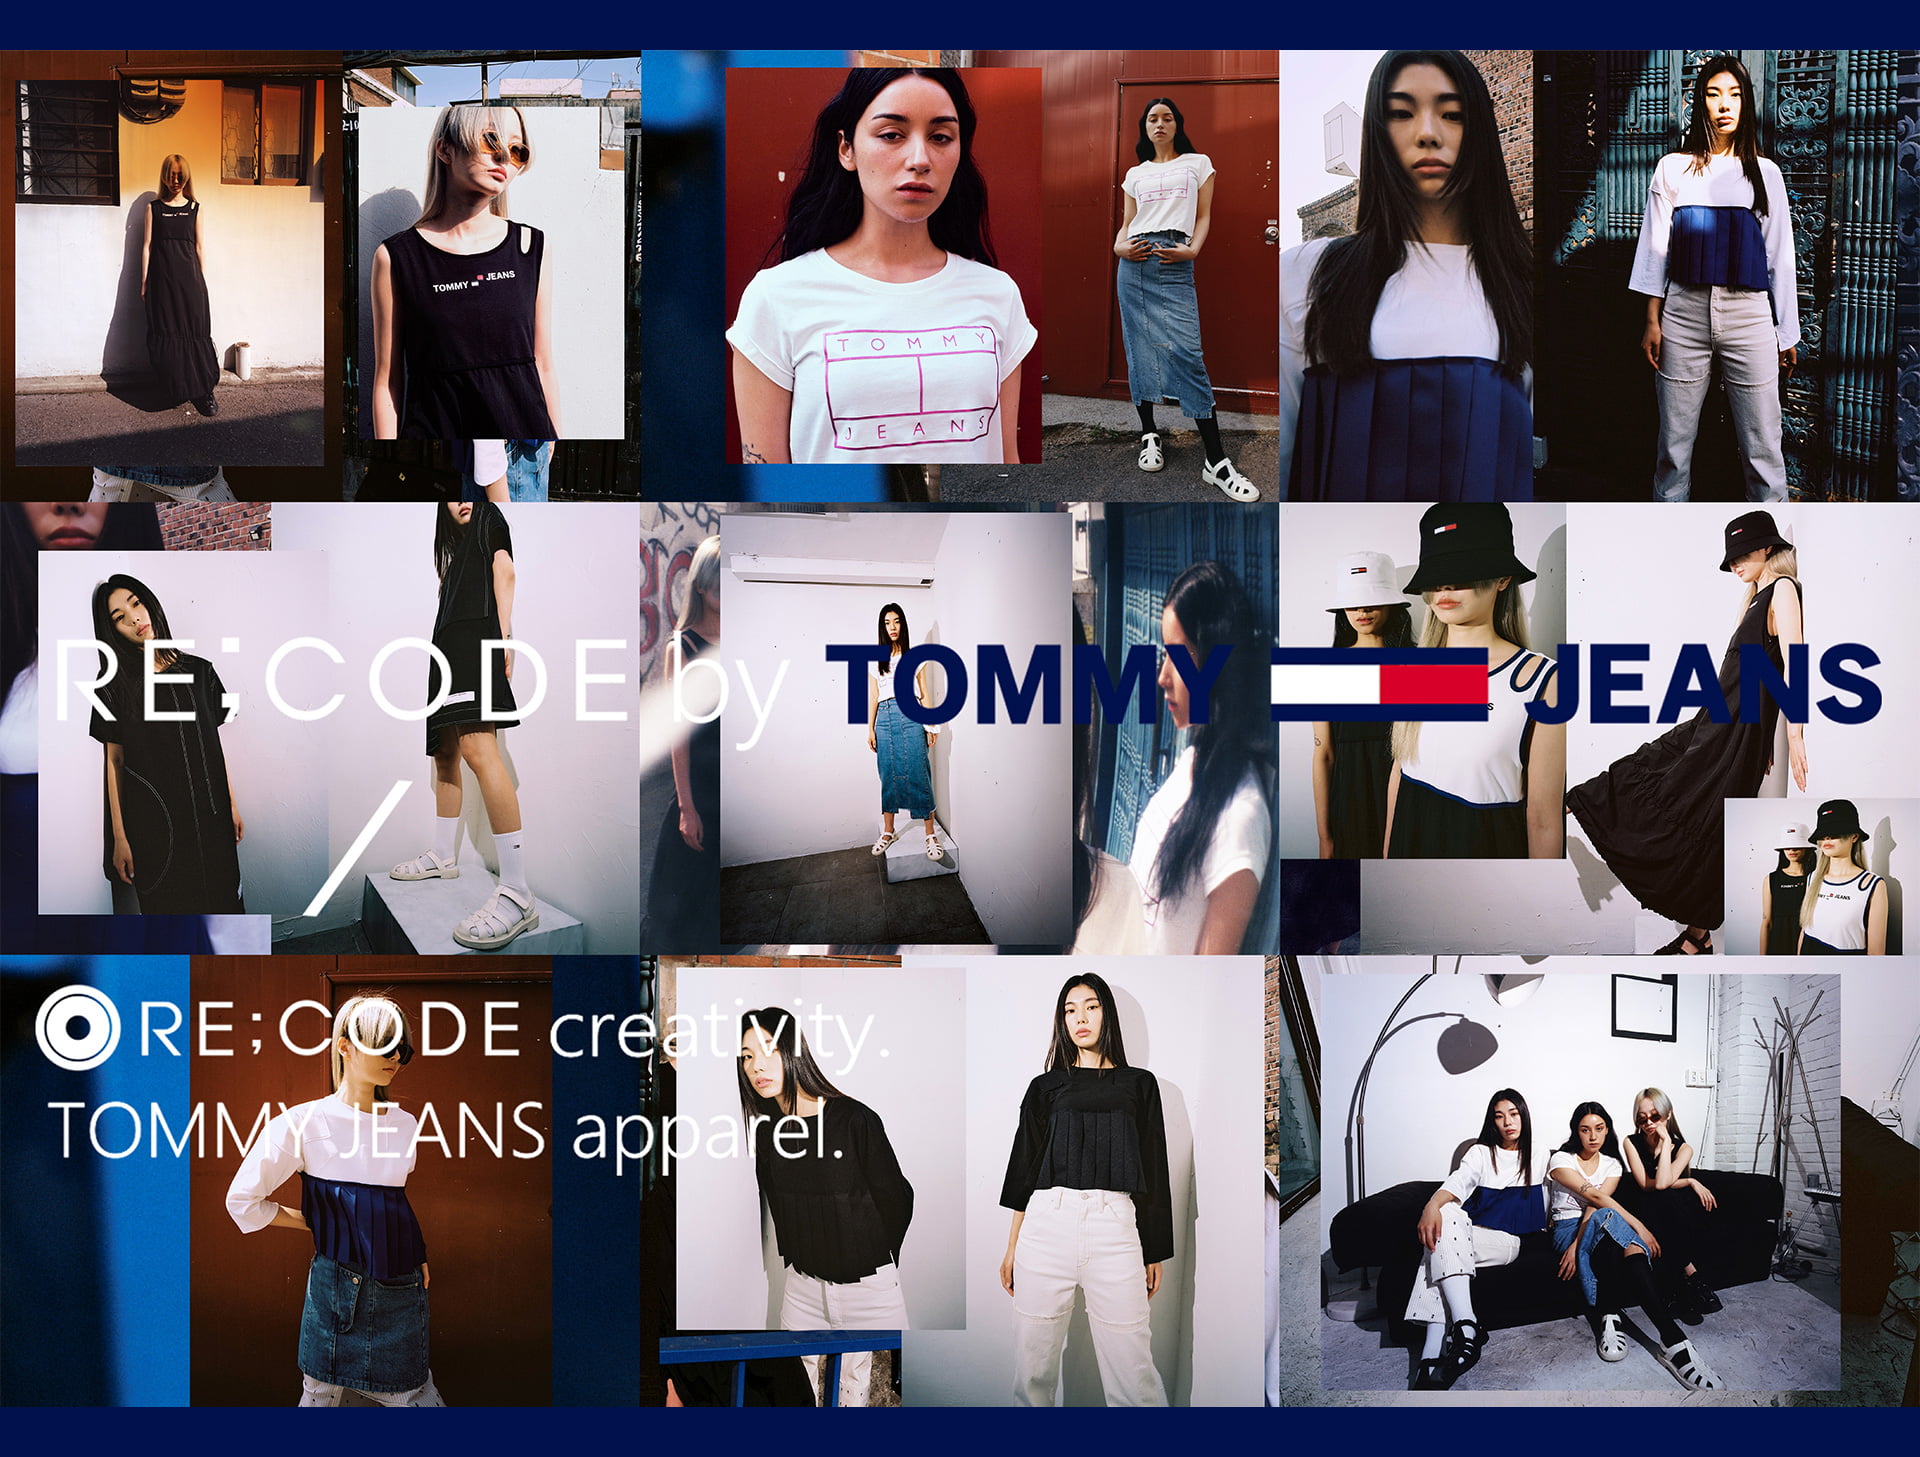 RE;CODE by TOMMY JEANS - RE;CODE creativity TOMMYS JEANS apparel.